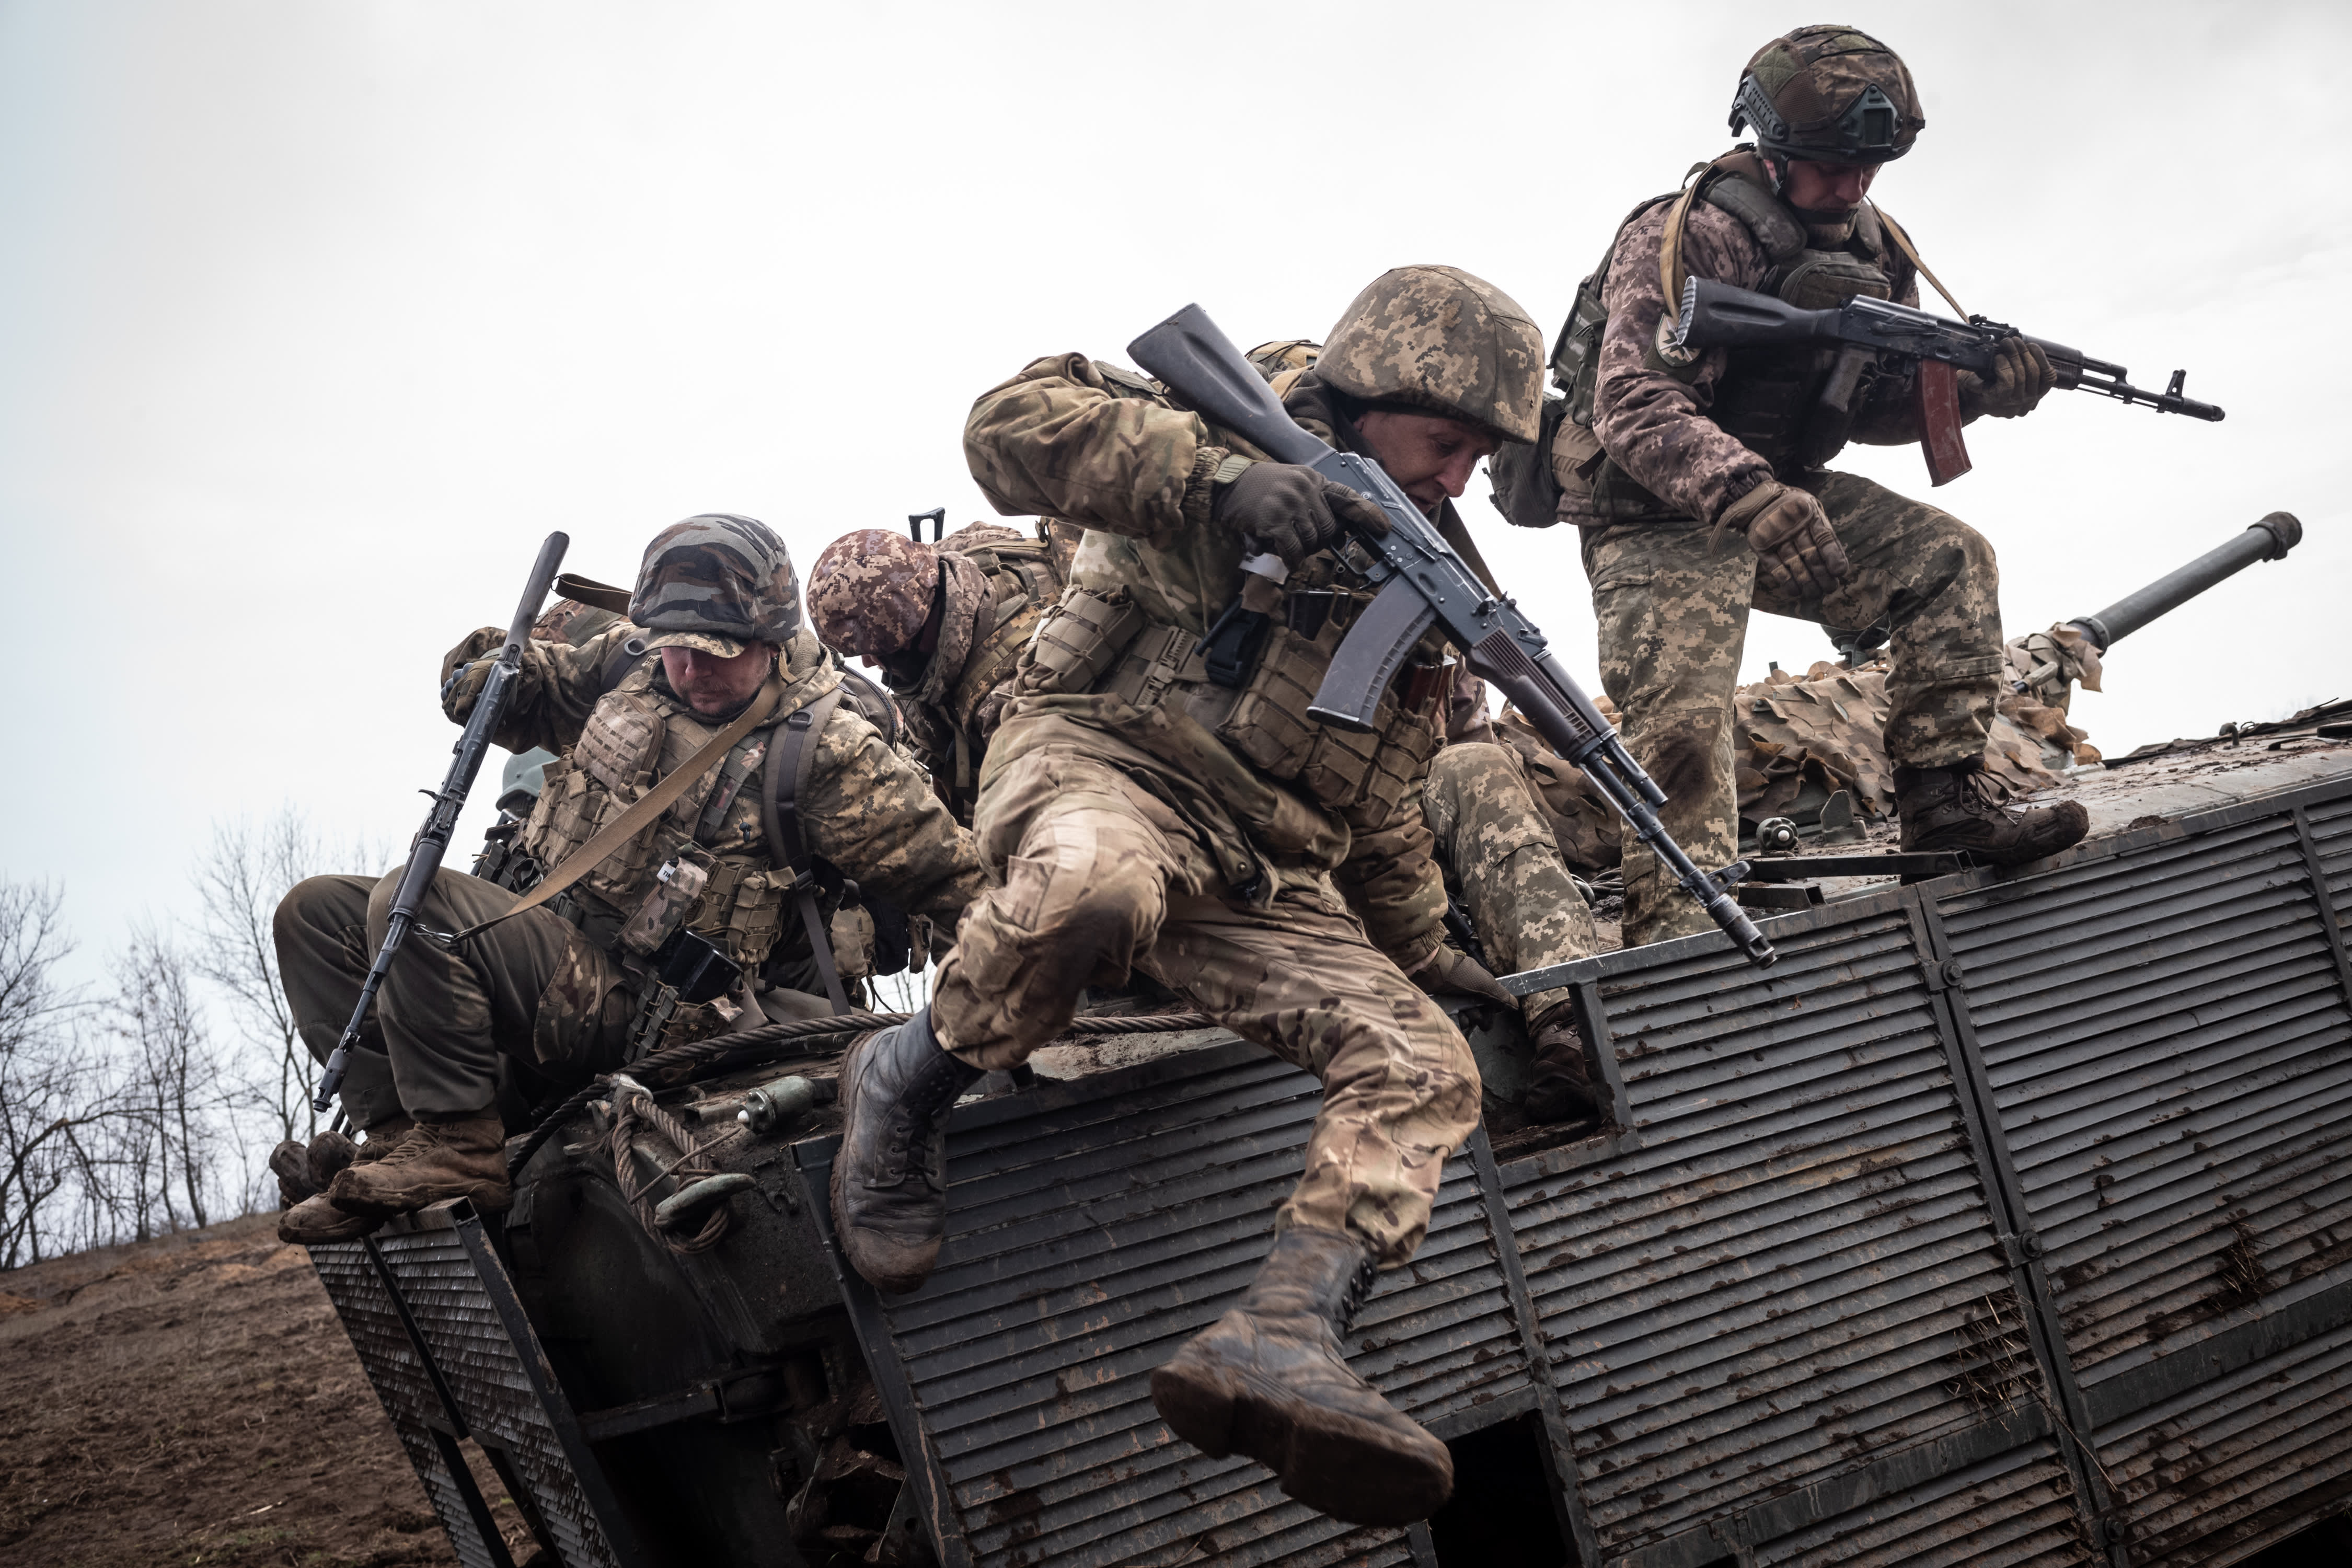 The “victory” Ukraine wants over Russia may not be achievable